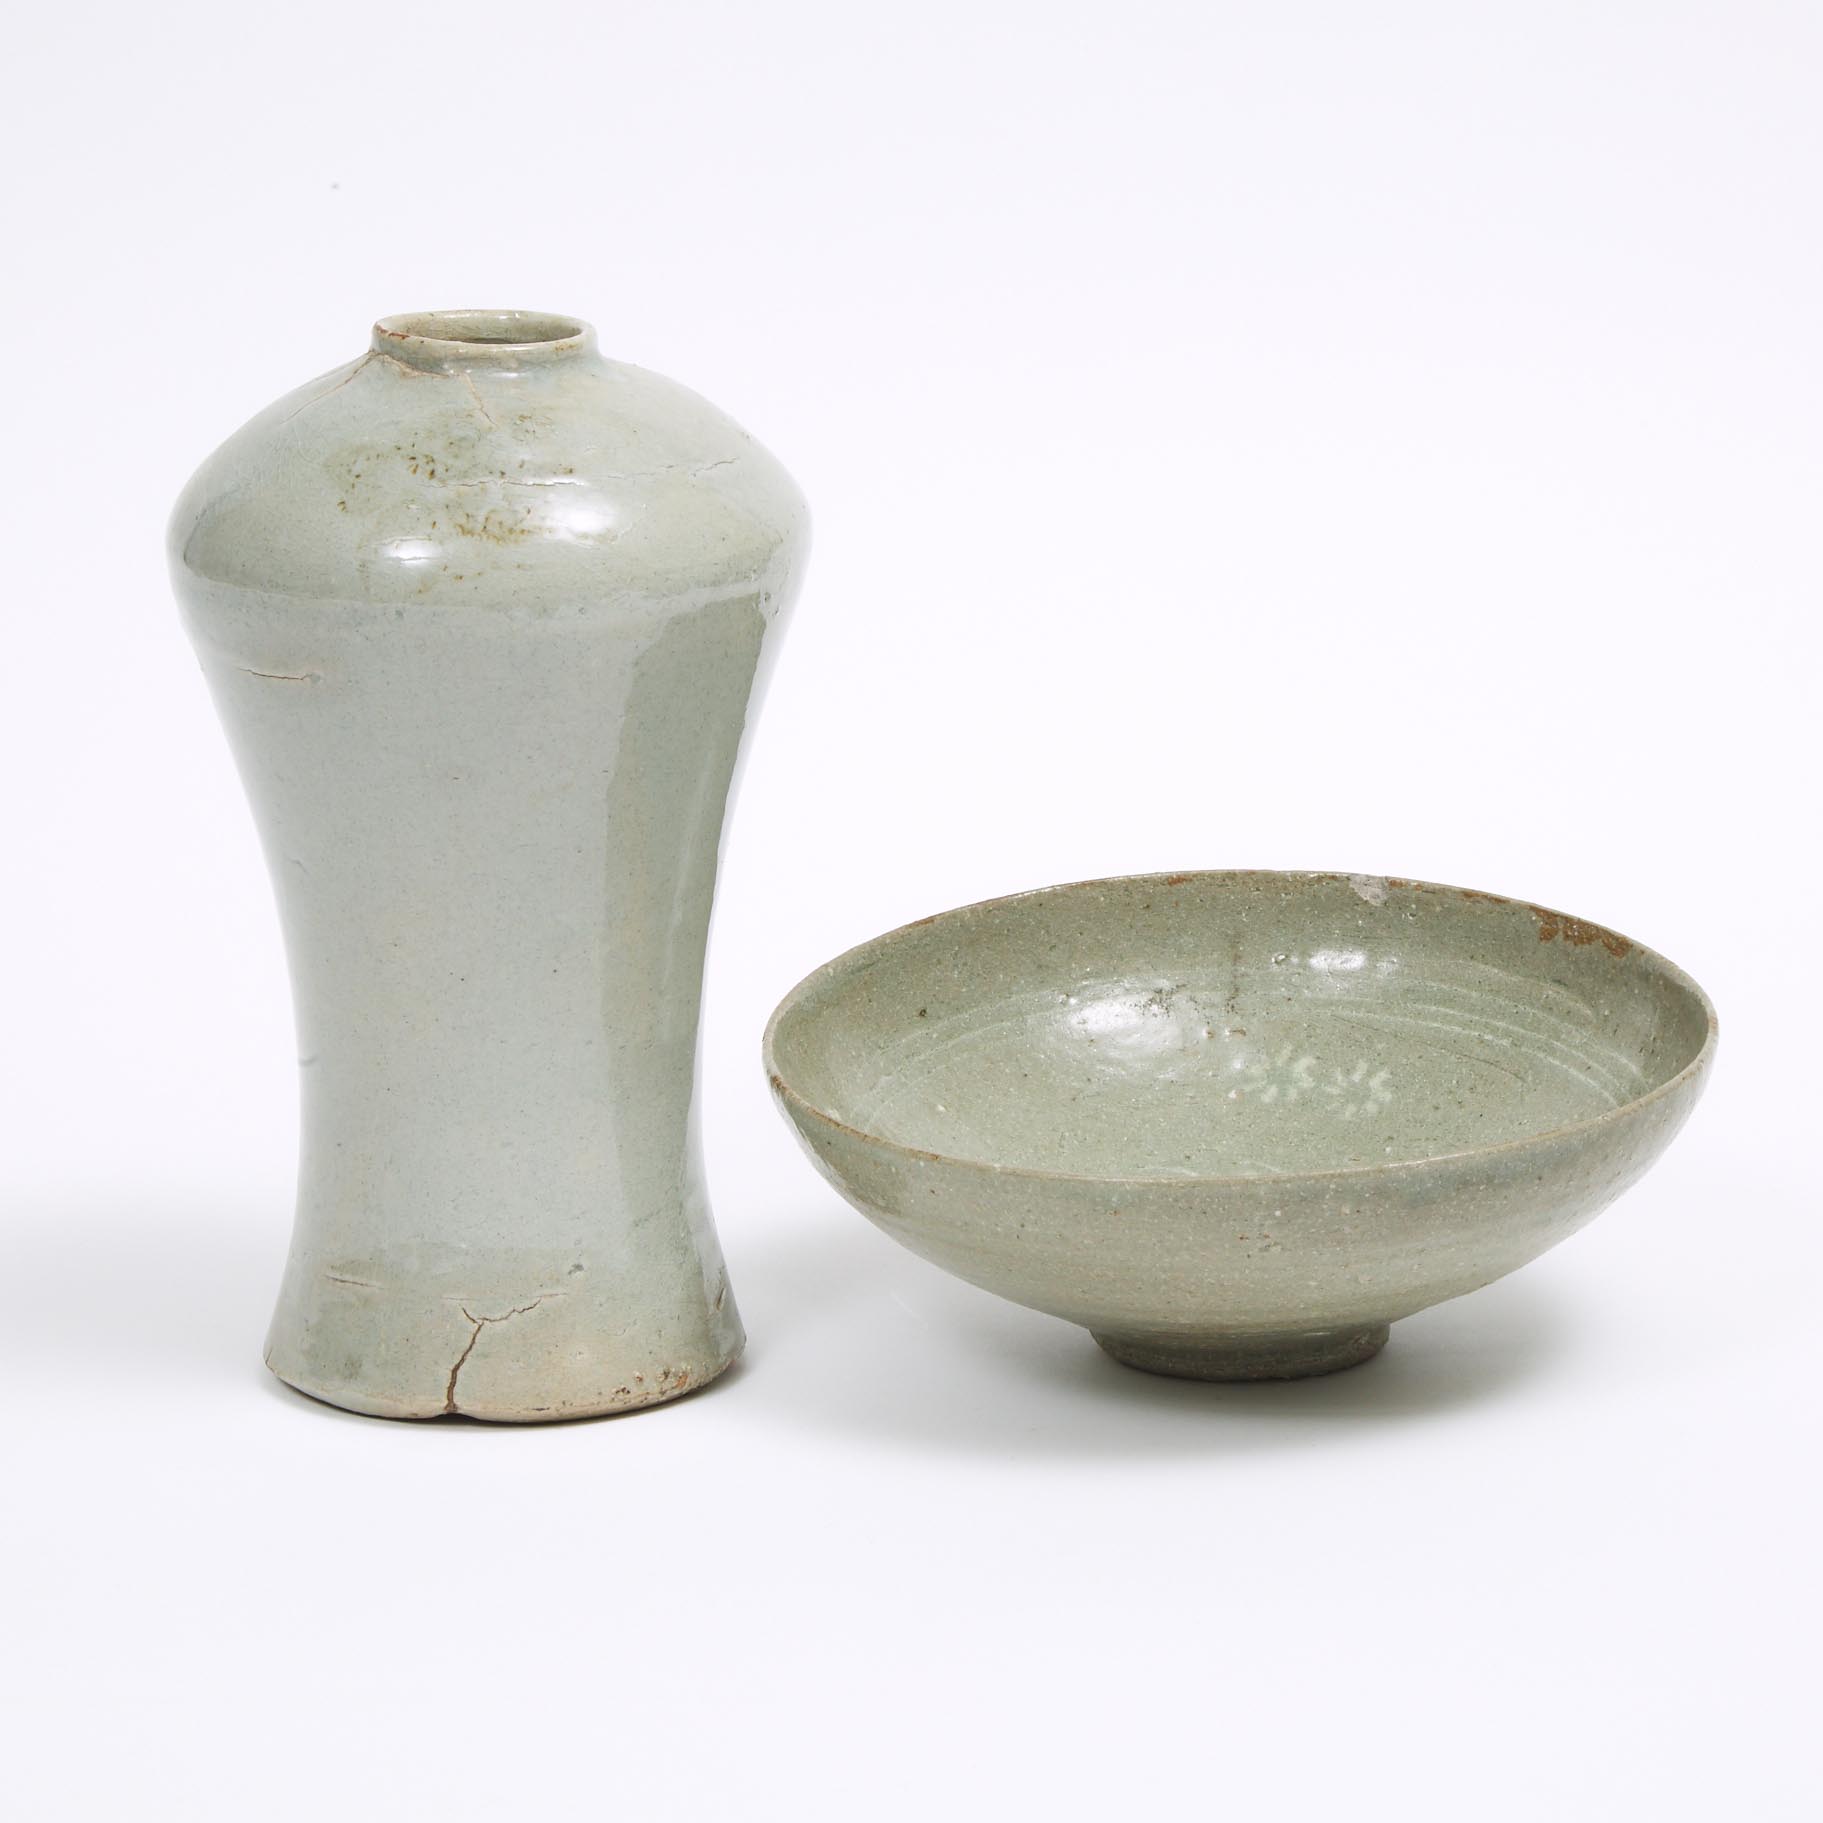 A Celadon Stoneware Bowl, together with a Vase, Goryeo Dynasty or Later